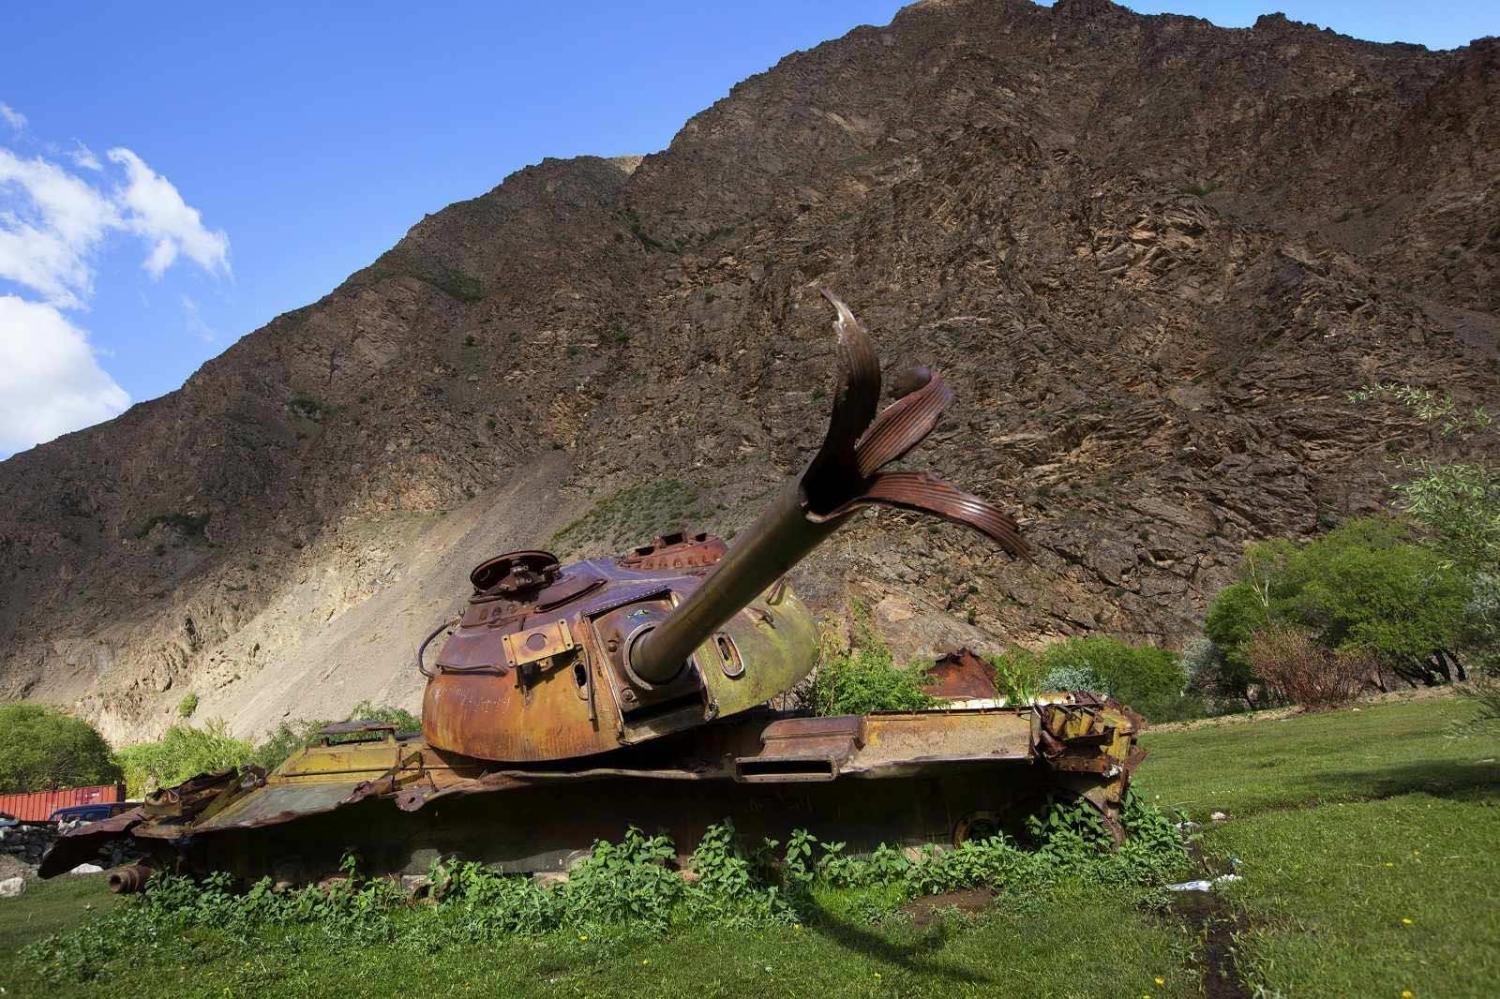 The remnants of a Russian tank in the Panjshir Valley after the area was seized by mujahideen during the Afghan war of 1979-1989, are a reminder of a futile decade-long conflict (Reza/Getty Images)